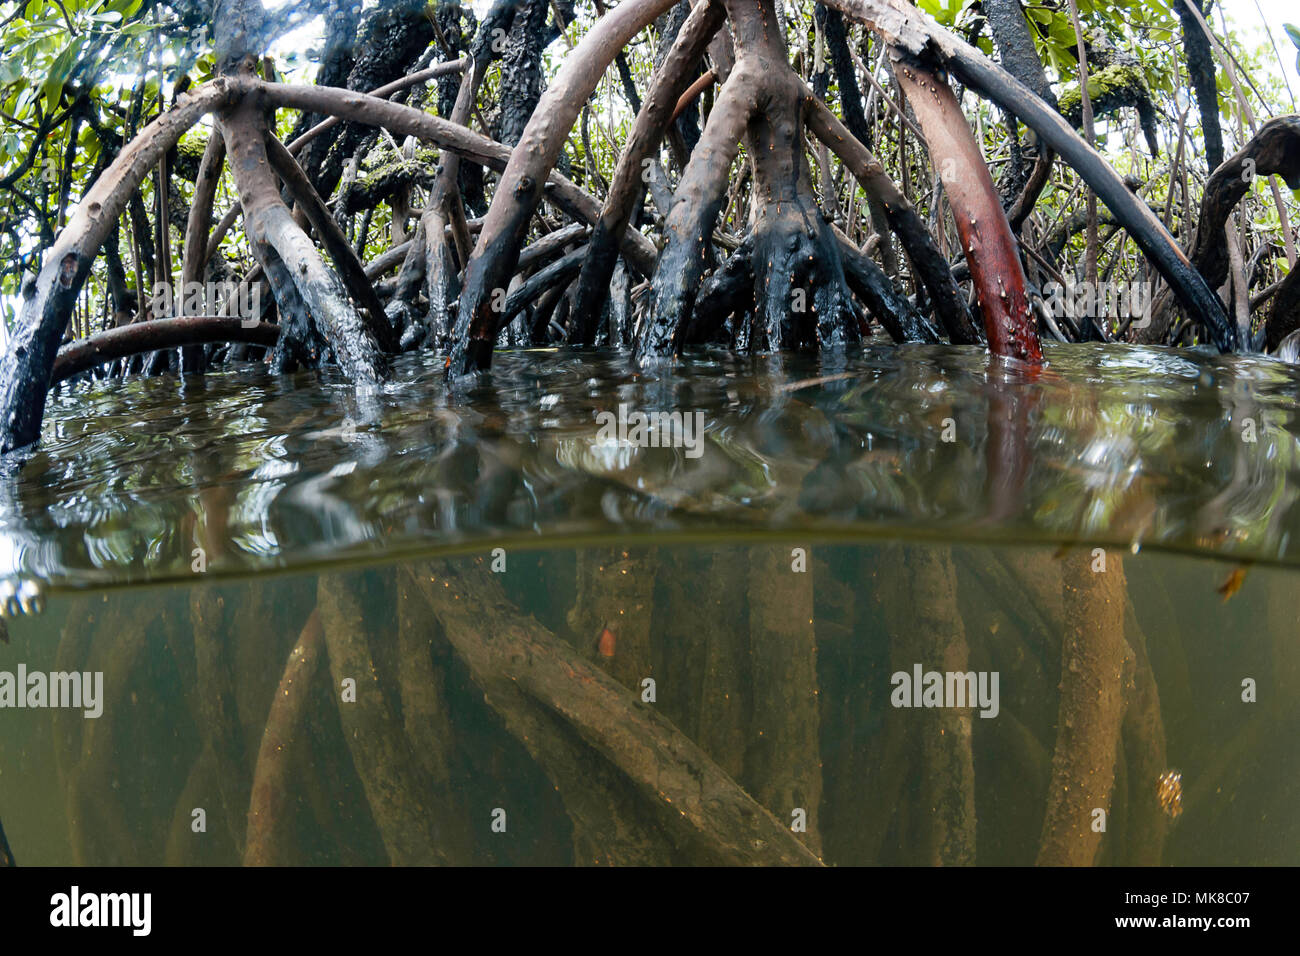 A split view of mangrove trees off the island of Yap, Micronesia. Stock Photo